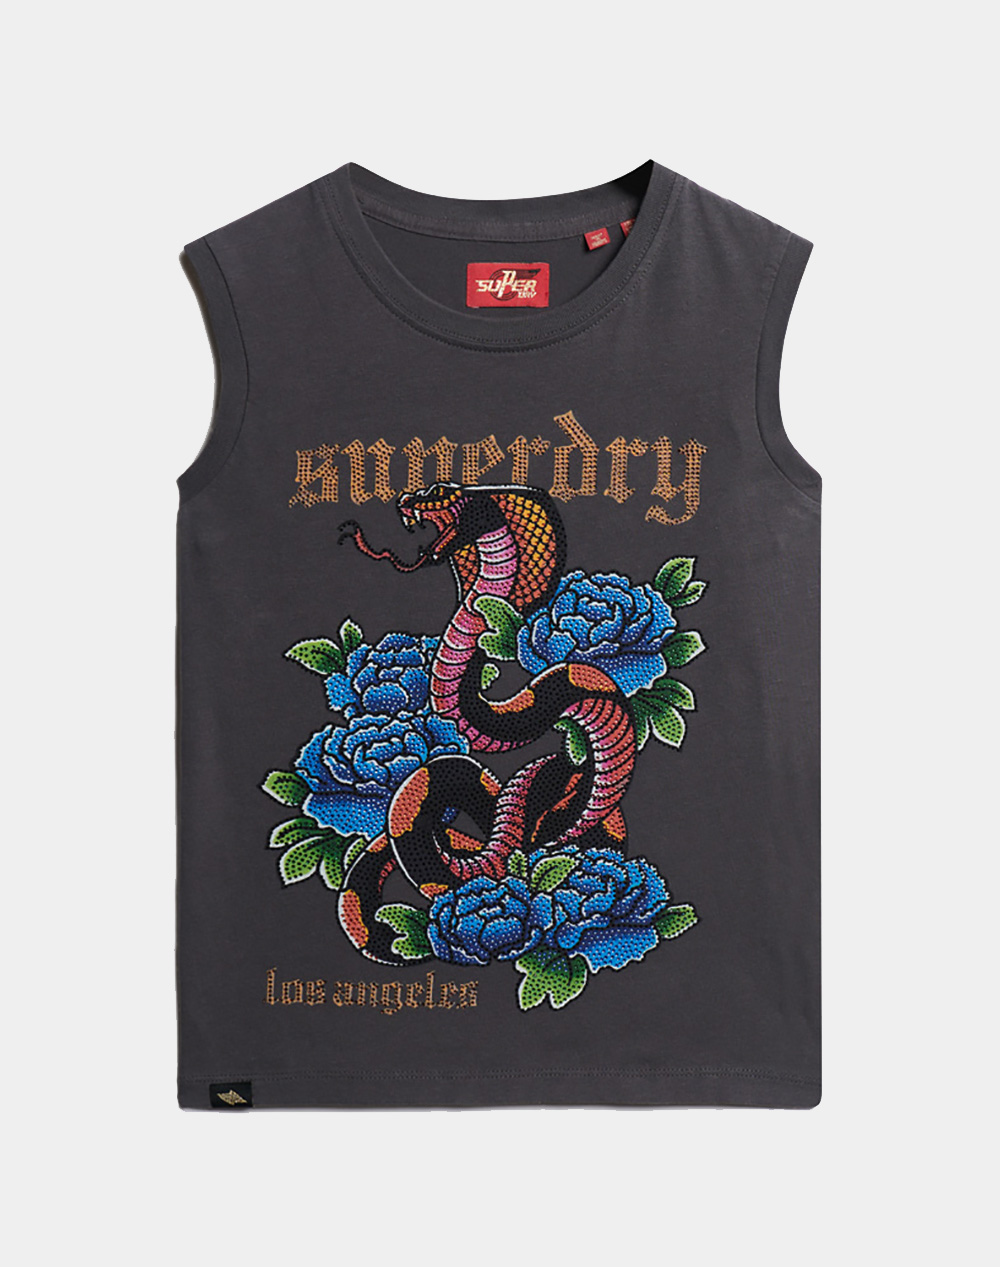 SUPERDRY D2 OVIN TATTOO RHINESTONE FITTED TANK WOMENS TOP